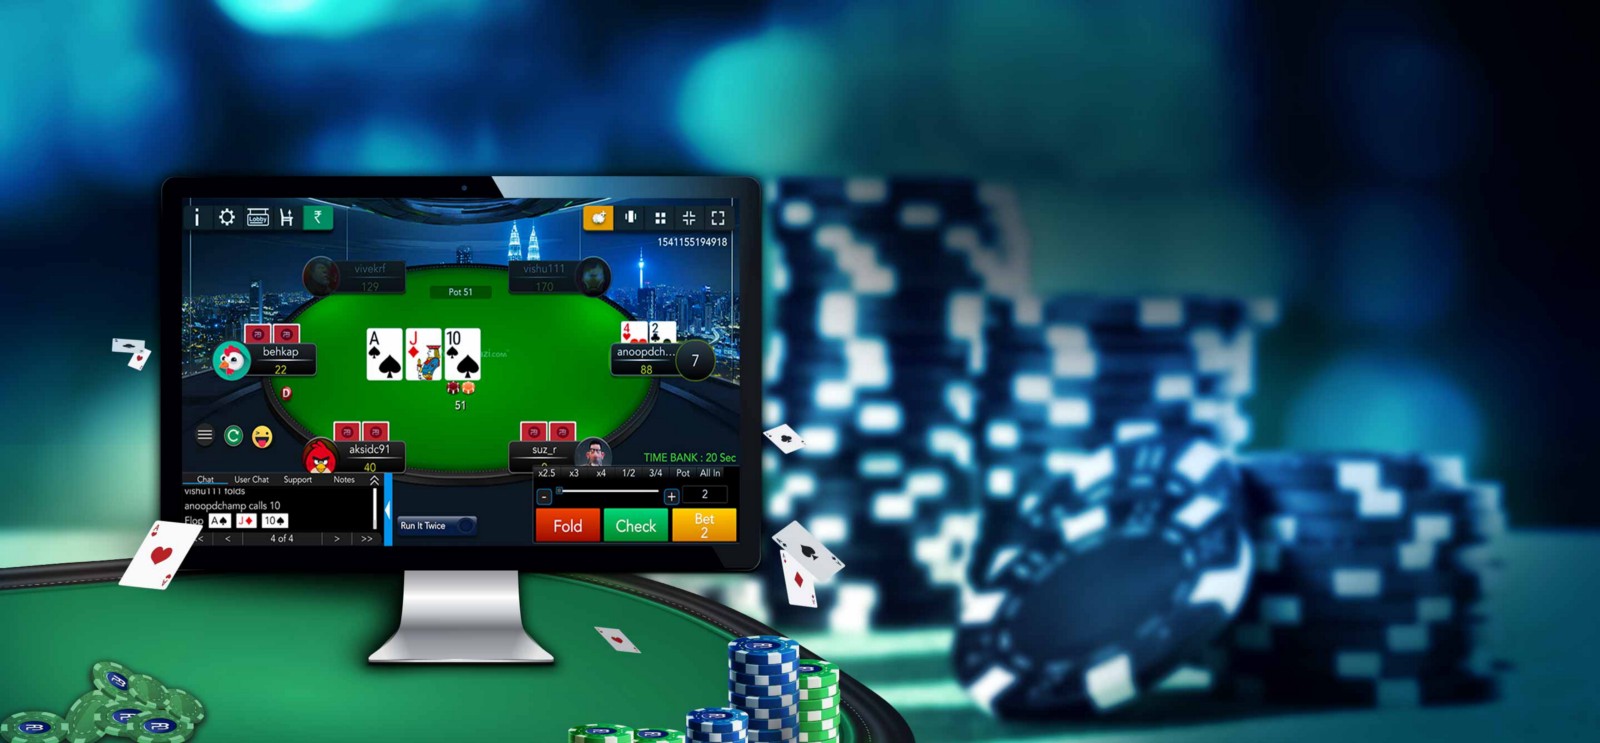 XOSlot: Your Next Best Online Casino Choice to Game On